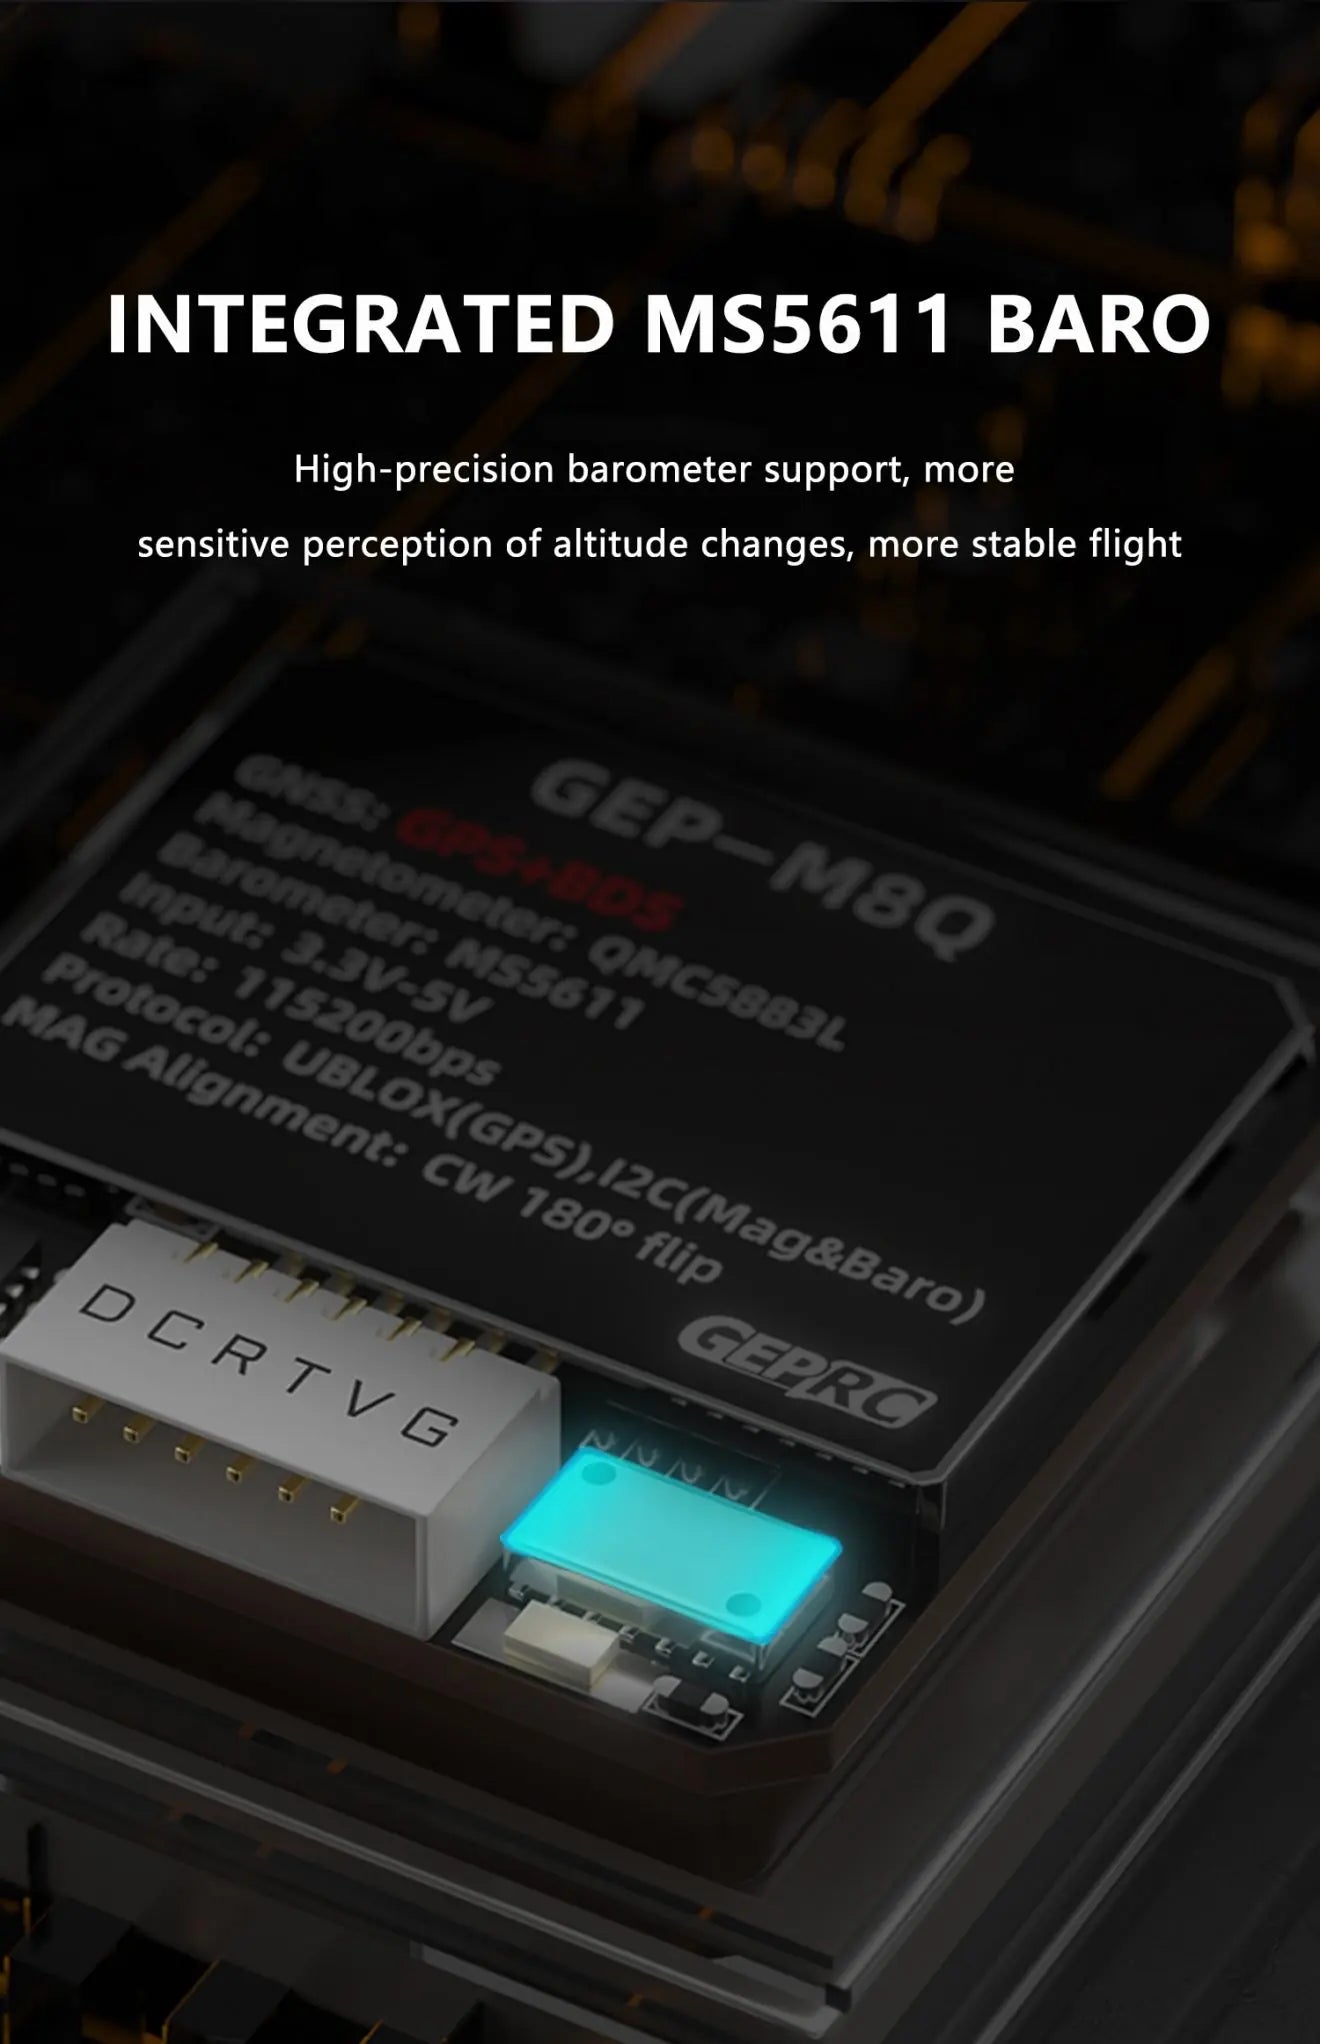 GEPRC GEP-M8Q GPS, MS5611 BARO High-precision barometer support; more sensitive perception of altitude